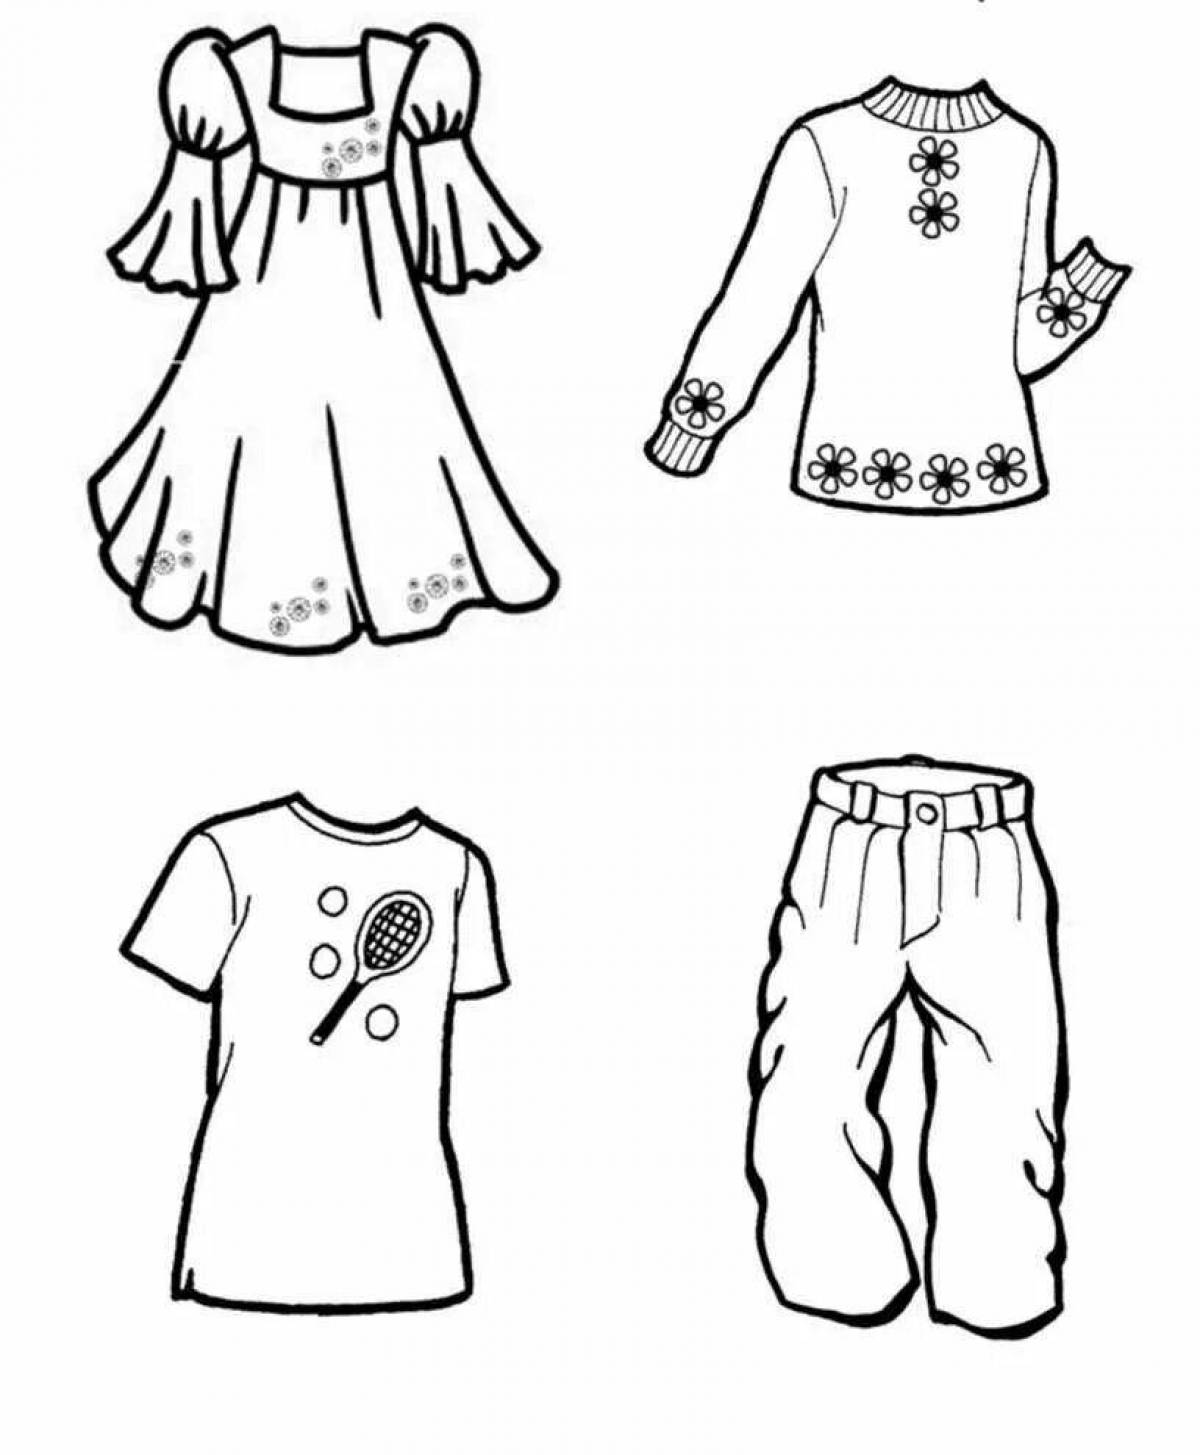 Coloring book ambitious clothes for children 4-5 years old